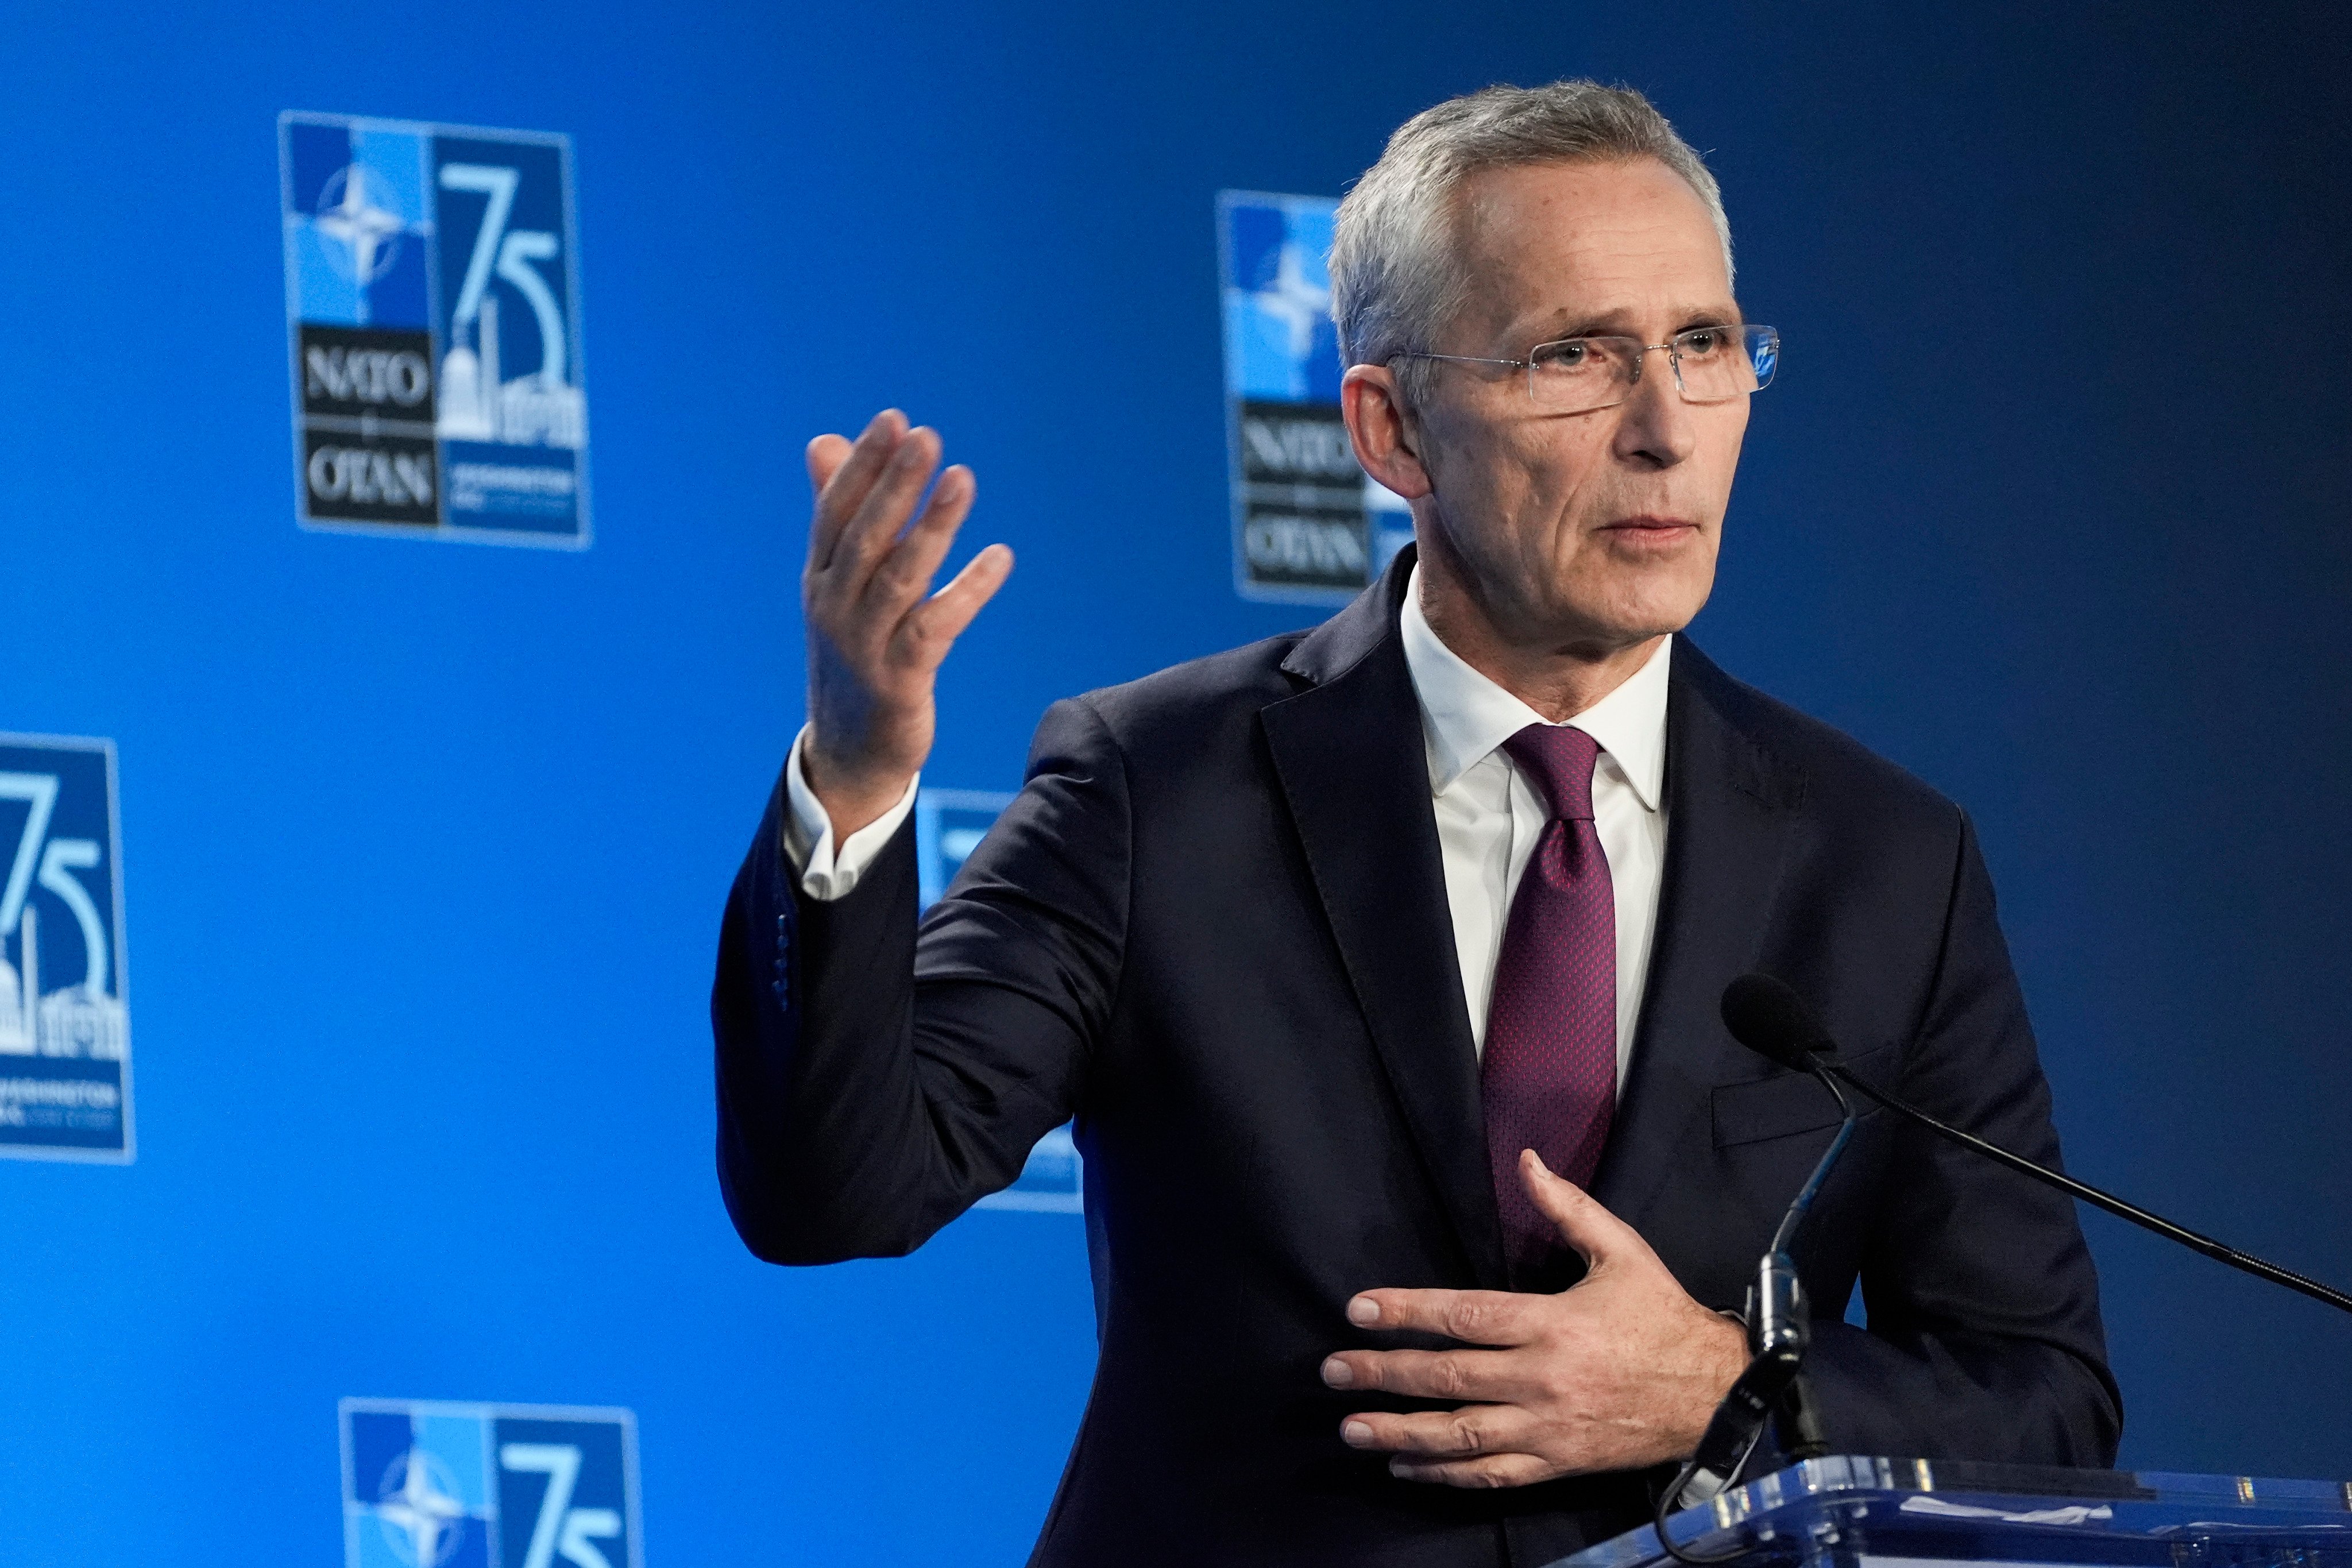 NATO Secretary General Jens Stoltenberg delivers remarks at a press conference in Washington on Thursday. Photo: AP